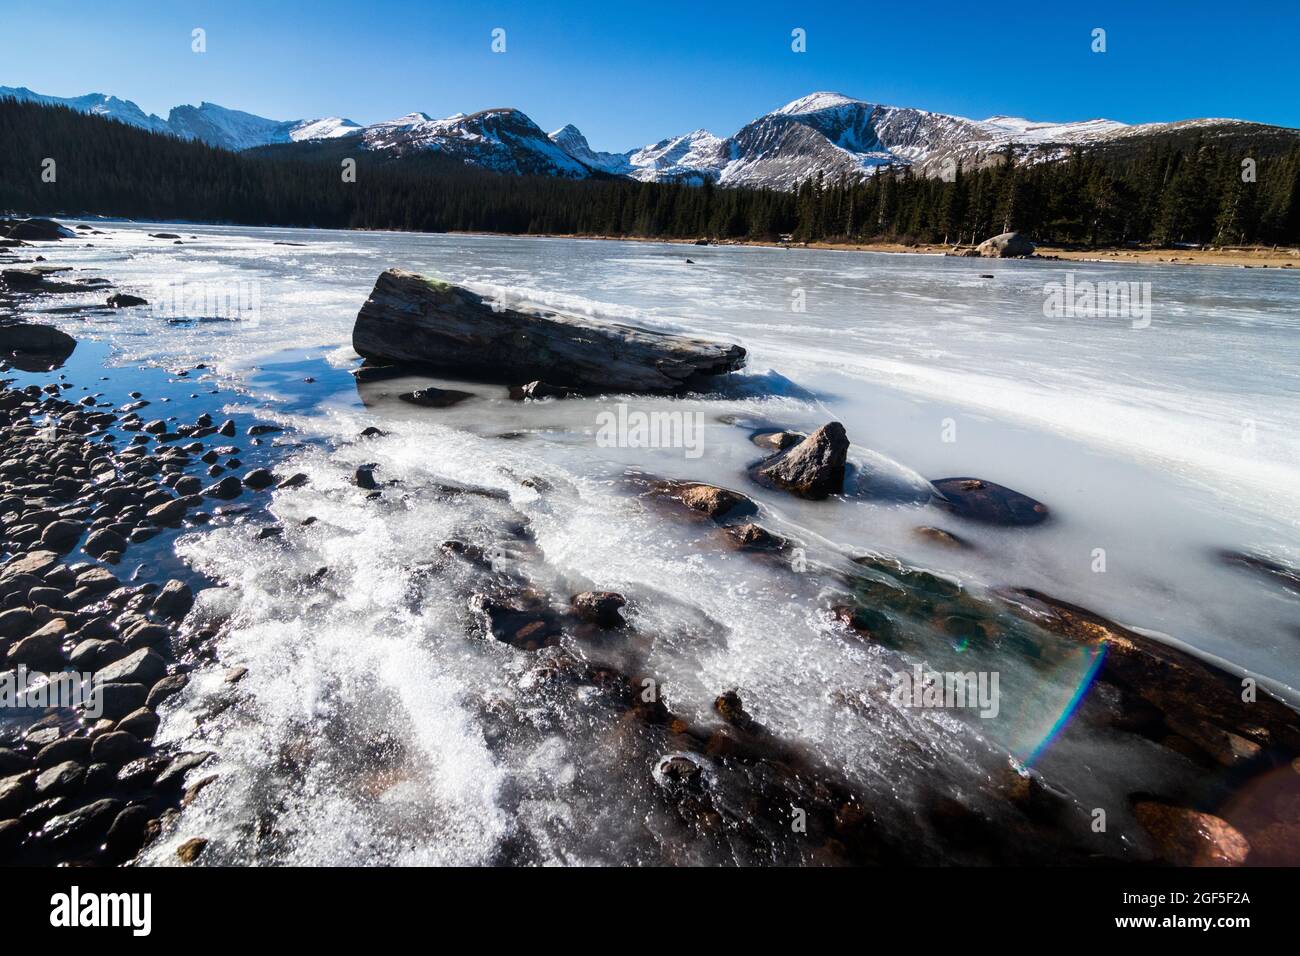 A wide angle landscape shot of a frozen lake with a log and rocks in it with mountains and a pine tree line in the background in winter in Colorado Stock Photo